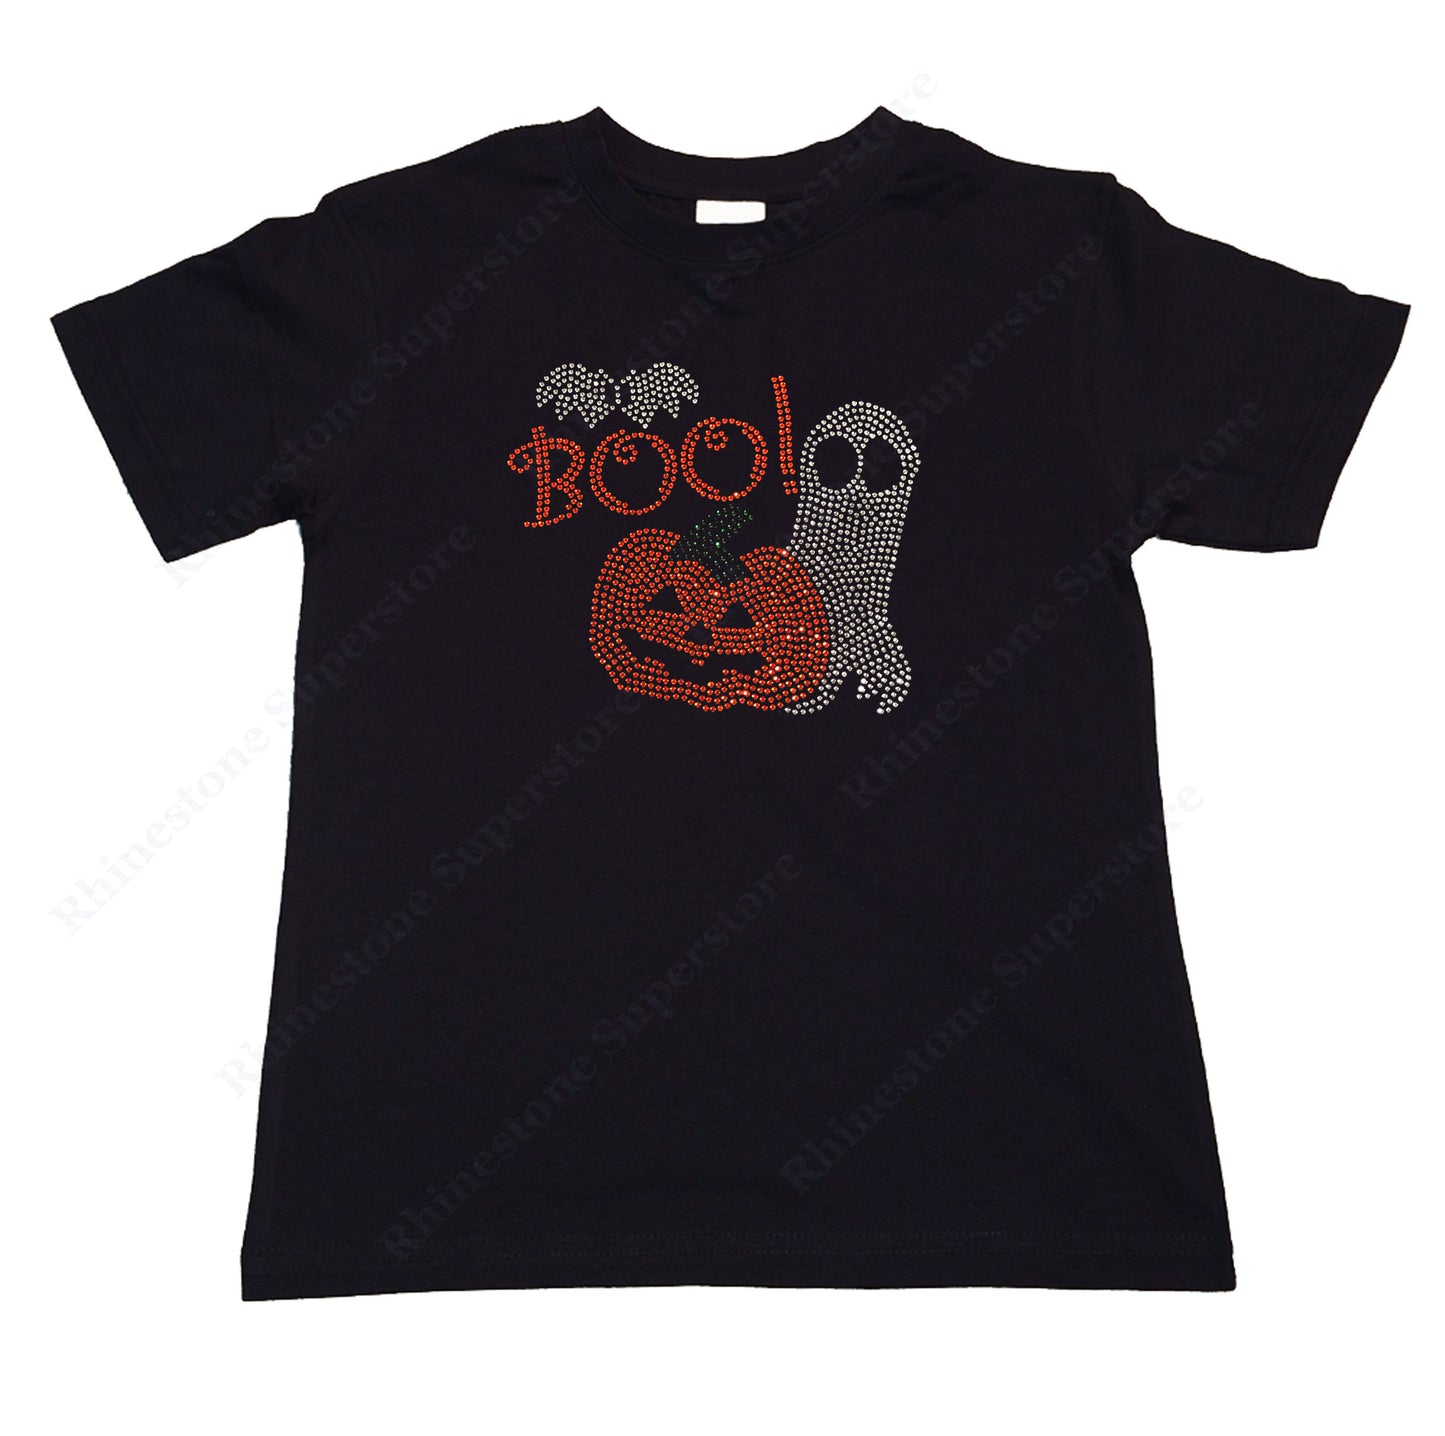 Girls Rhinestone T-Shirt " Pumpkin and Ghost with Boo for Halloween " Kids Size 3 to 14 Available